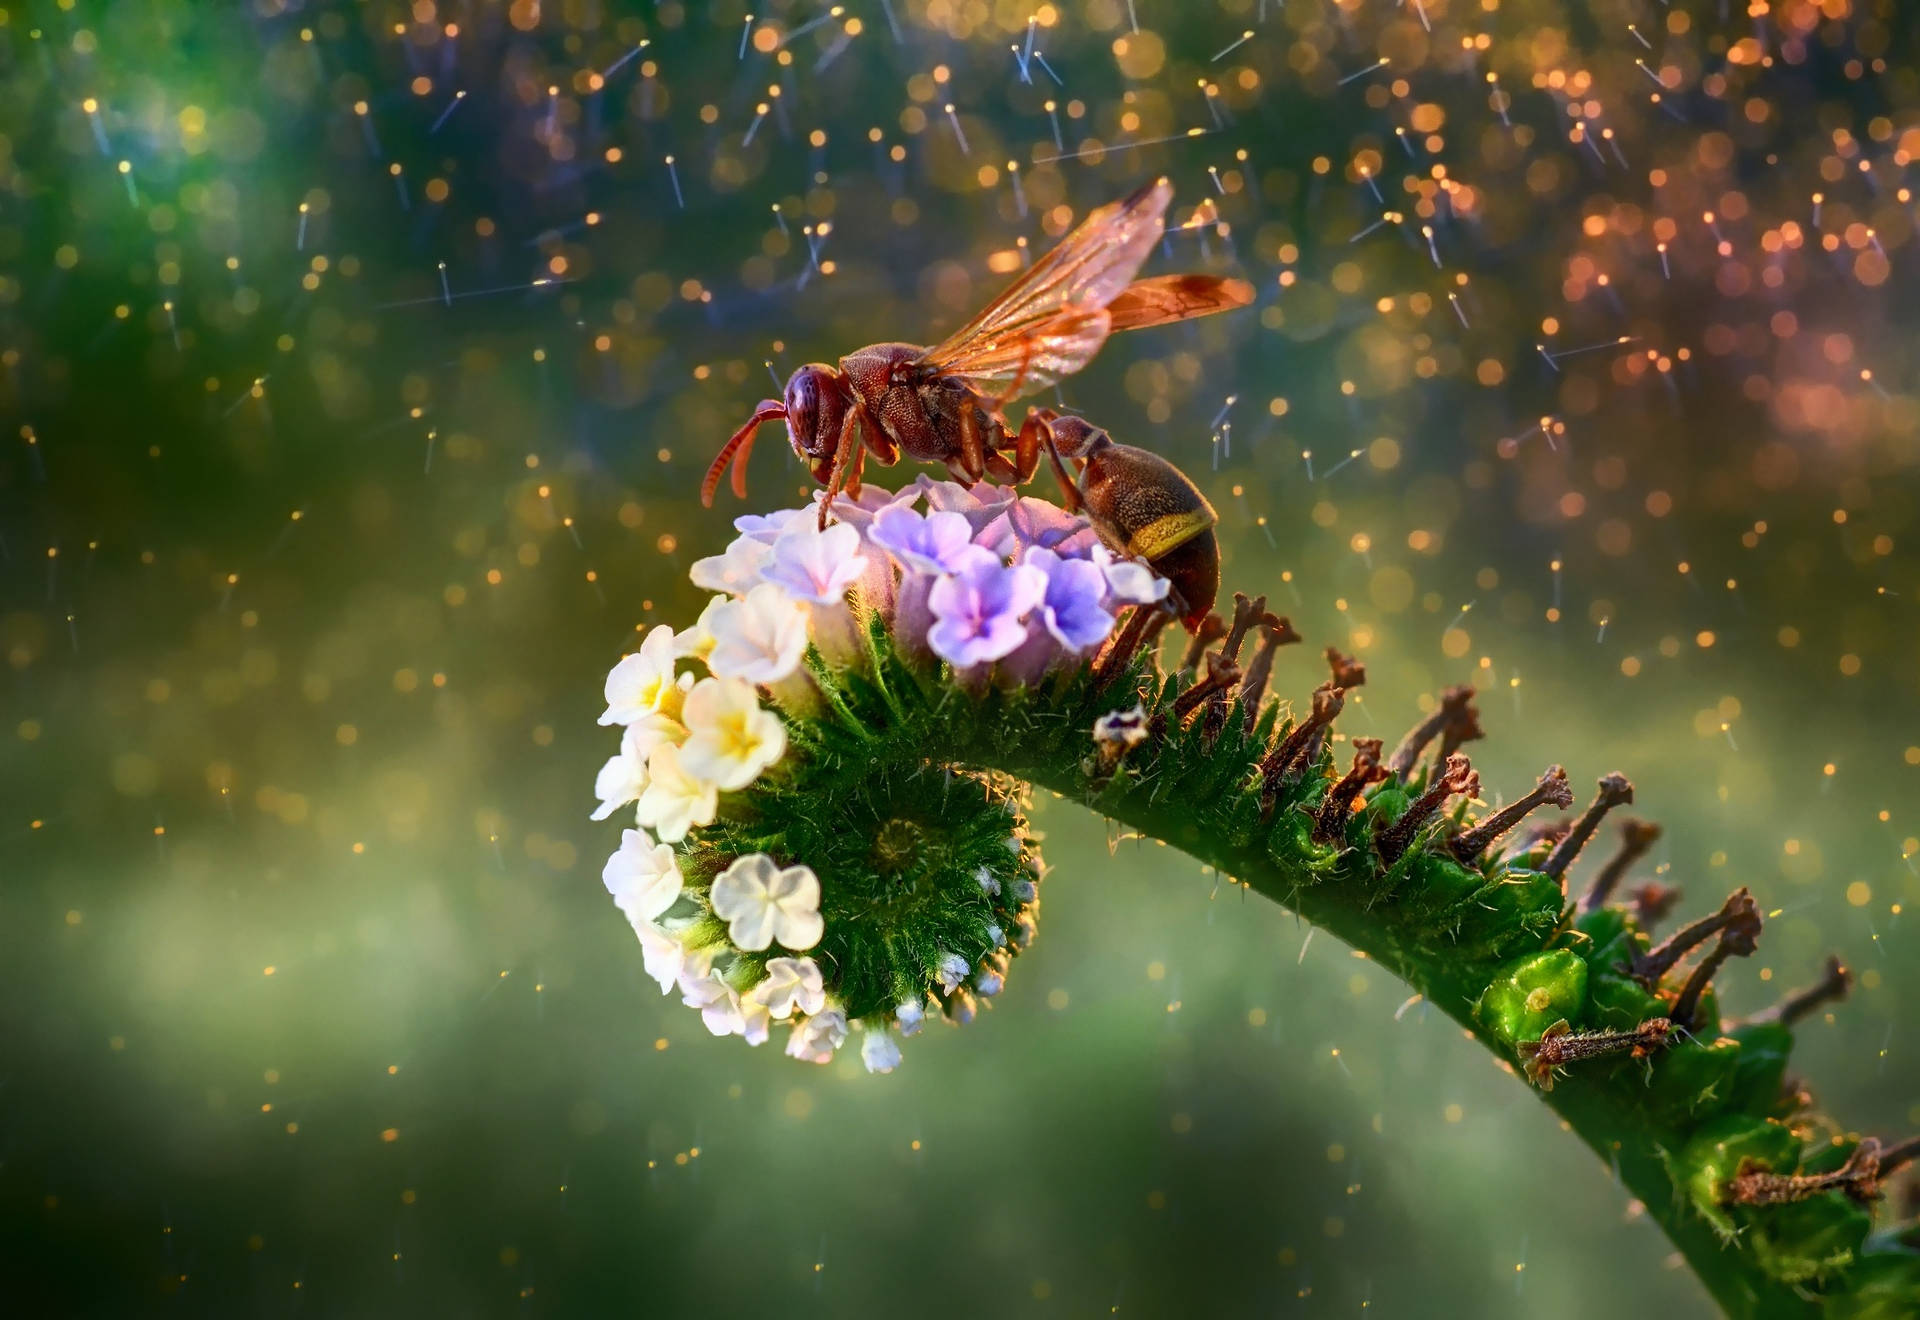 Insect Perched On Colorful Flowers Wallpaper